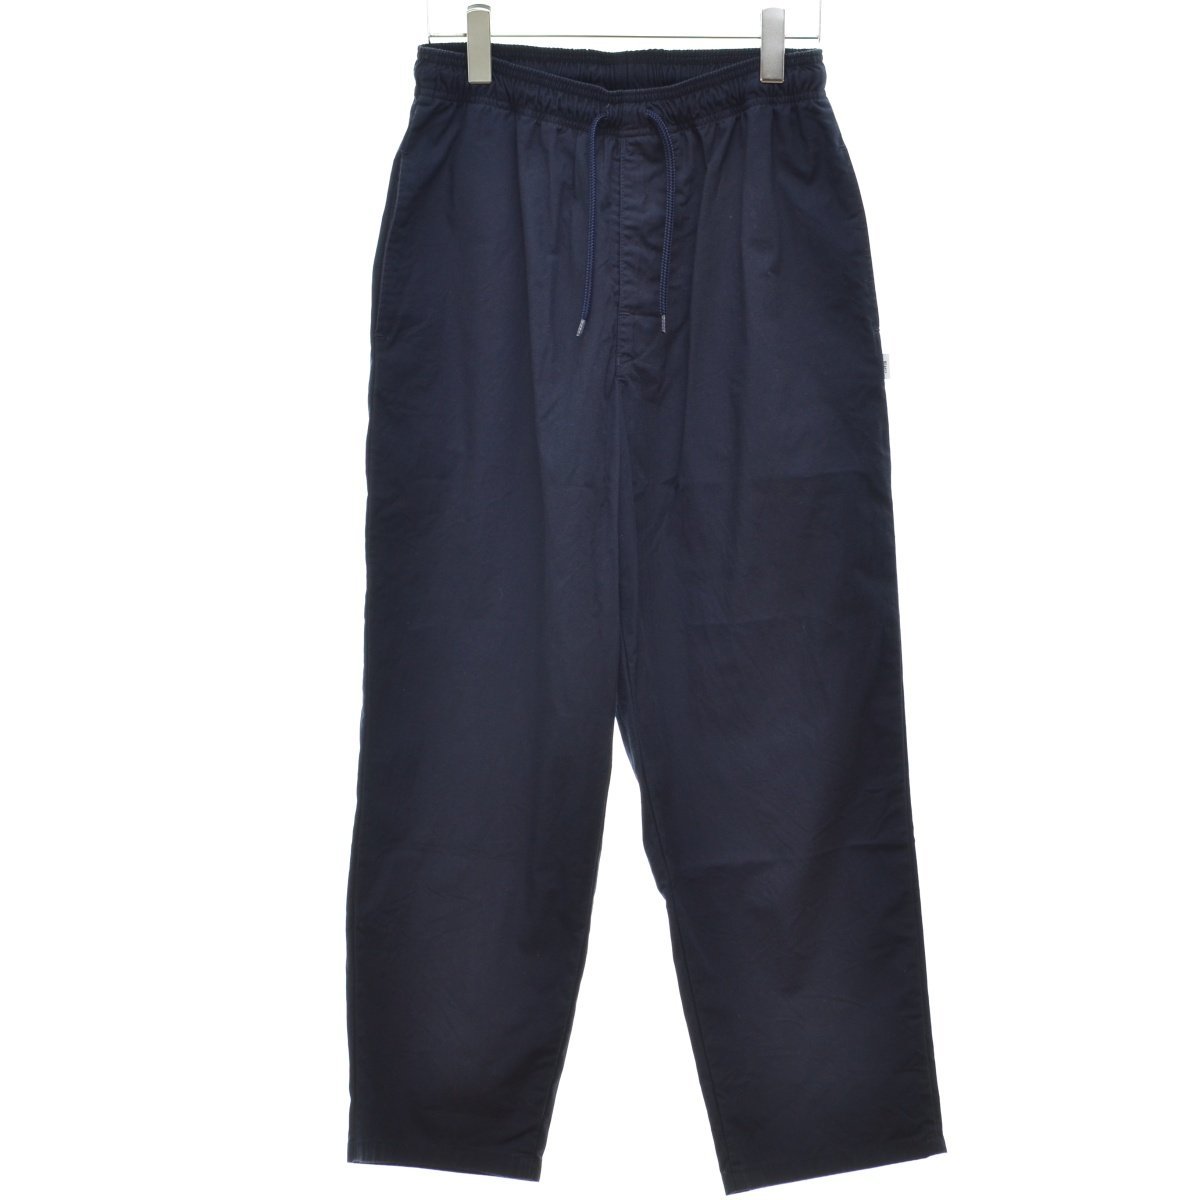 【1/S】WTAPS / ダブルタップス 23AW 232TQDT-PTM01 SDDT2001 / TROUSERS / COTTON. RIPSTOPパンツ_画像1